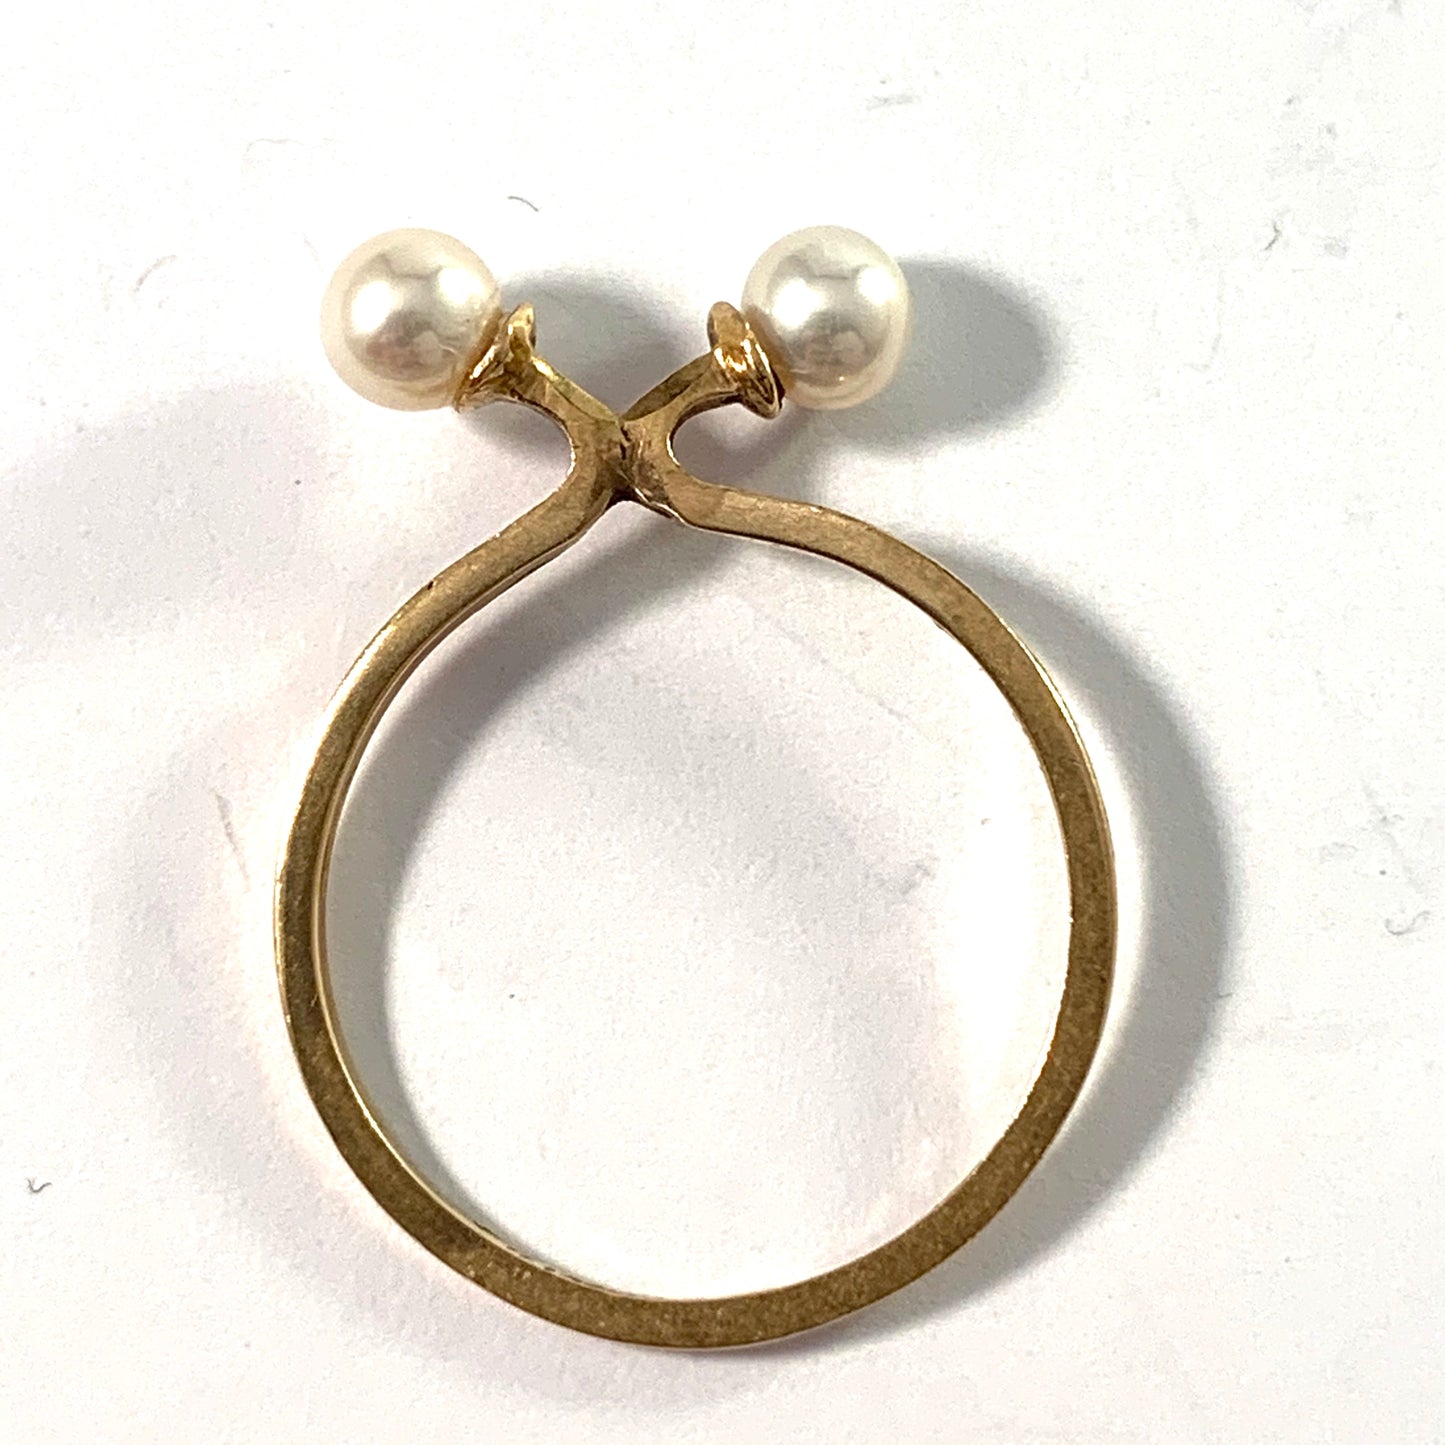 Theresia Hvorslev, Sweden. Vintage 18k Gold Cultured Pearl Stack Ring. "The Tale Of The Ring"